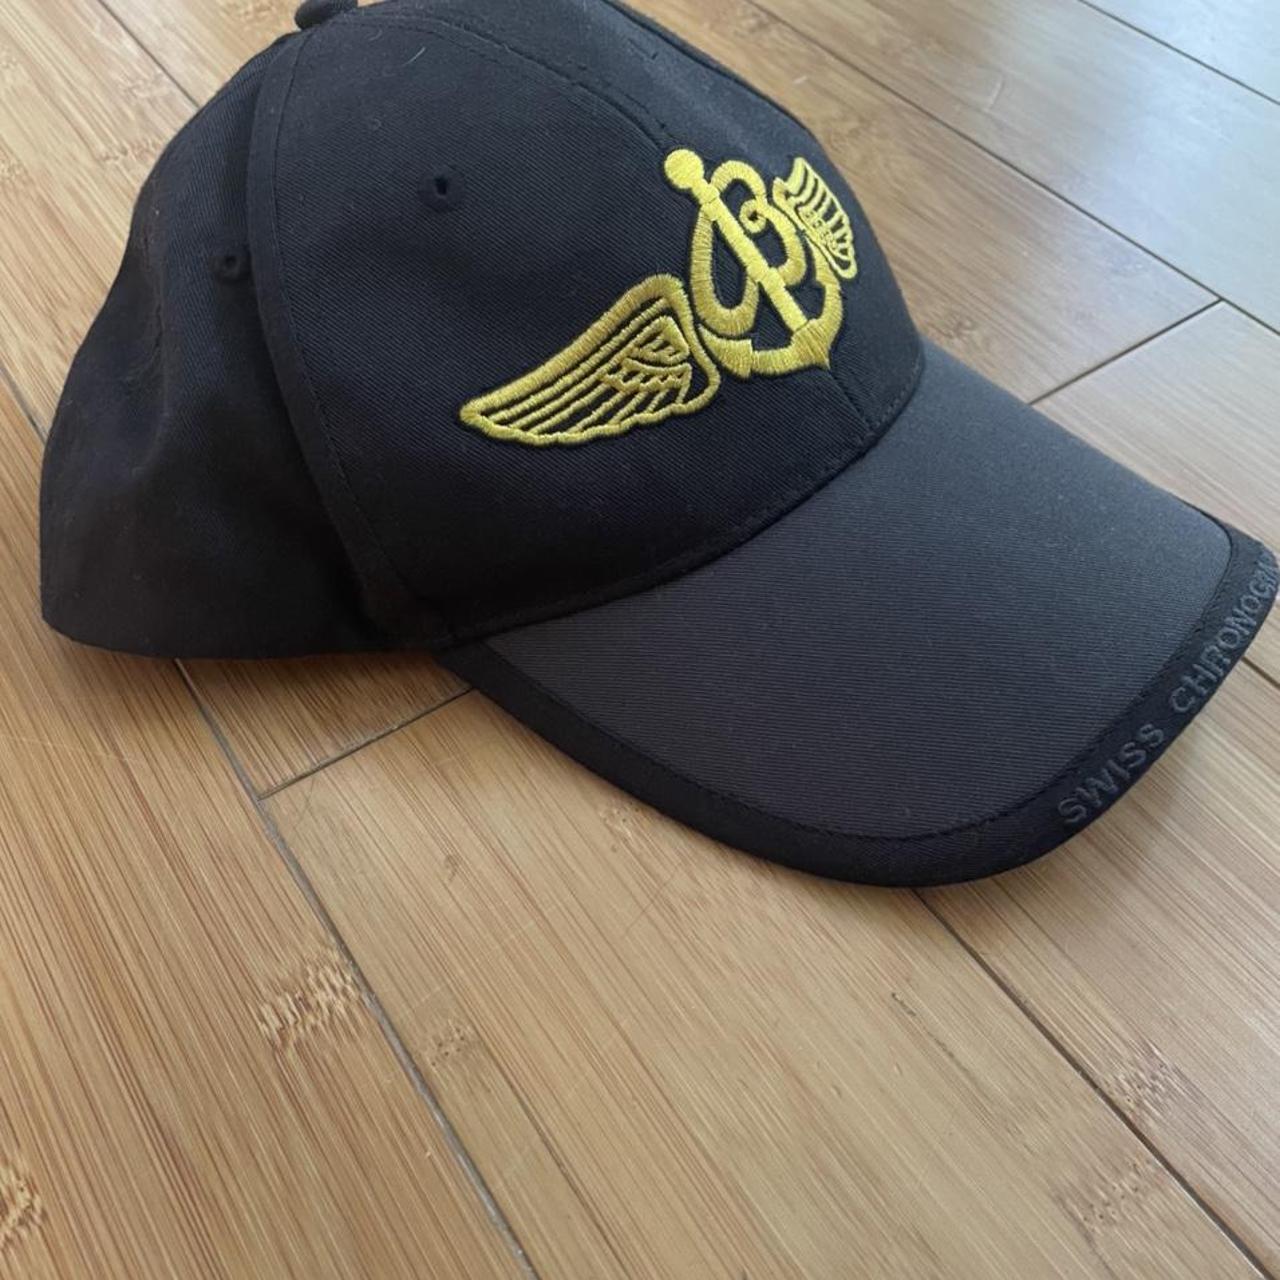 Breitling Men's Navy and Gold Hat (2)